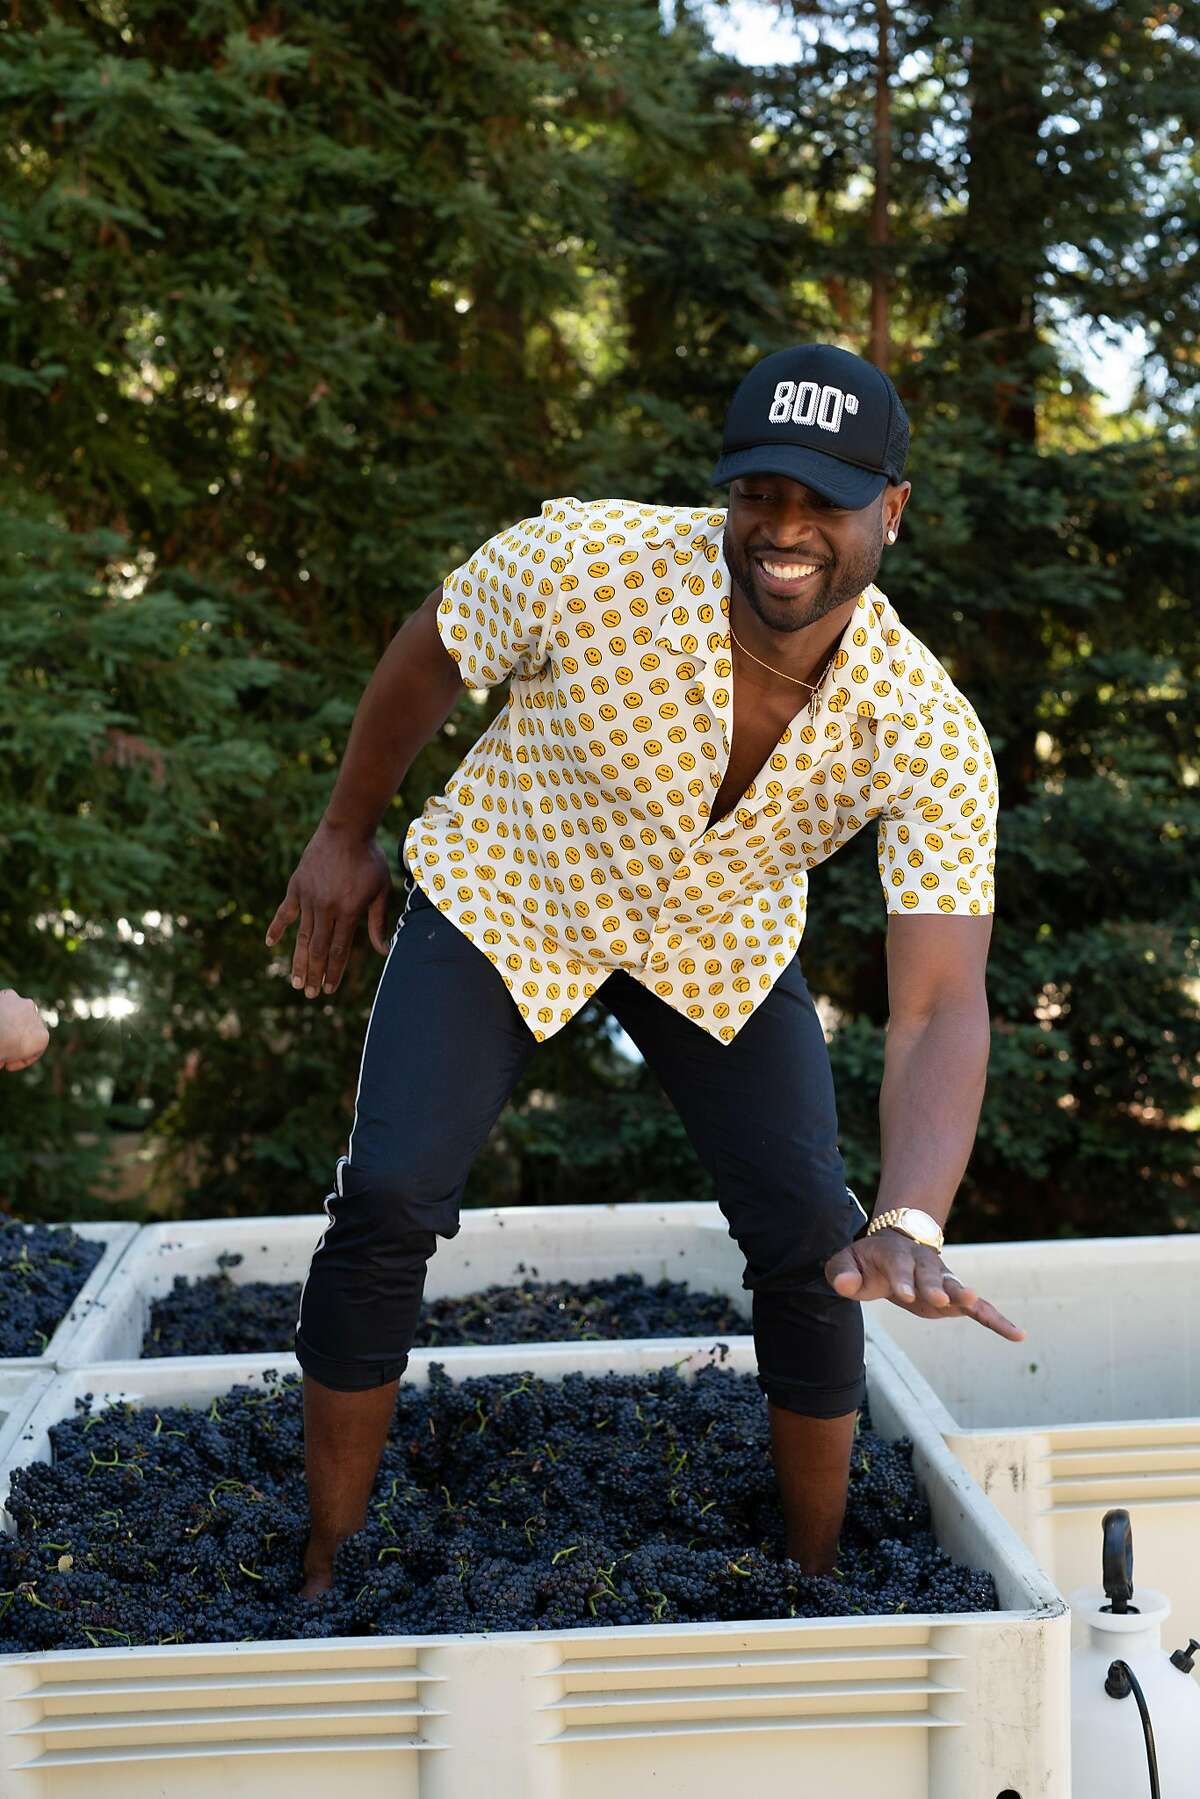 NBA star Dwyane Wade owns D Wade Cellars in partnership with Napa's Pahlmeyer family.